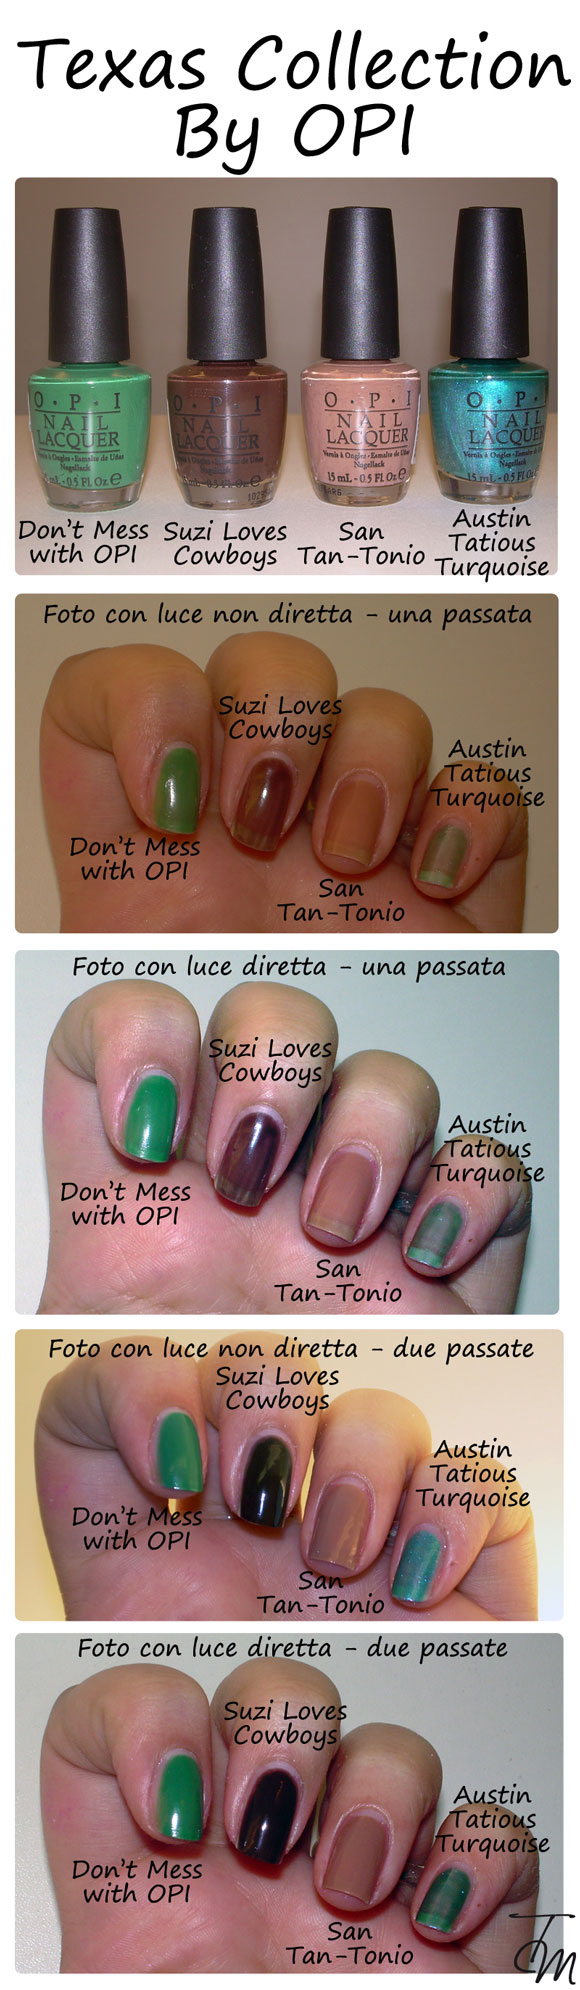 swatches-texas-collection-by-opi-1